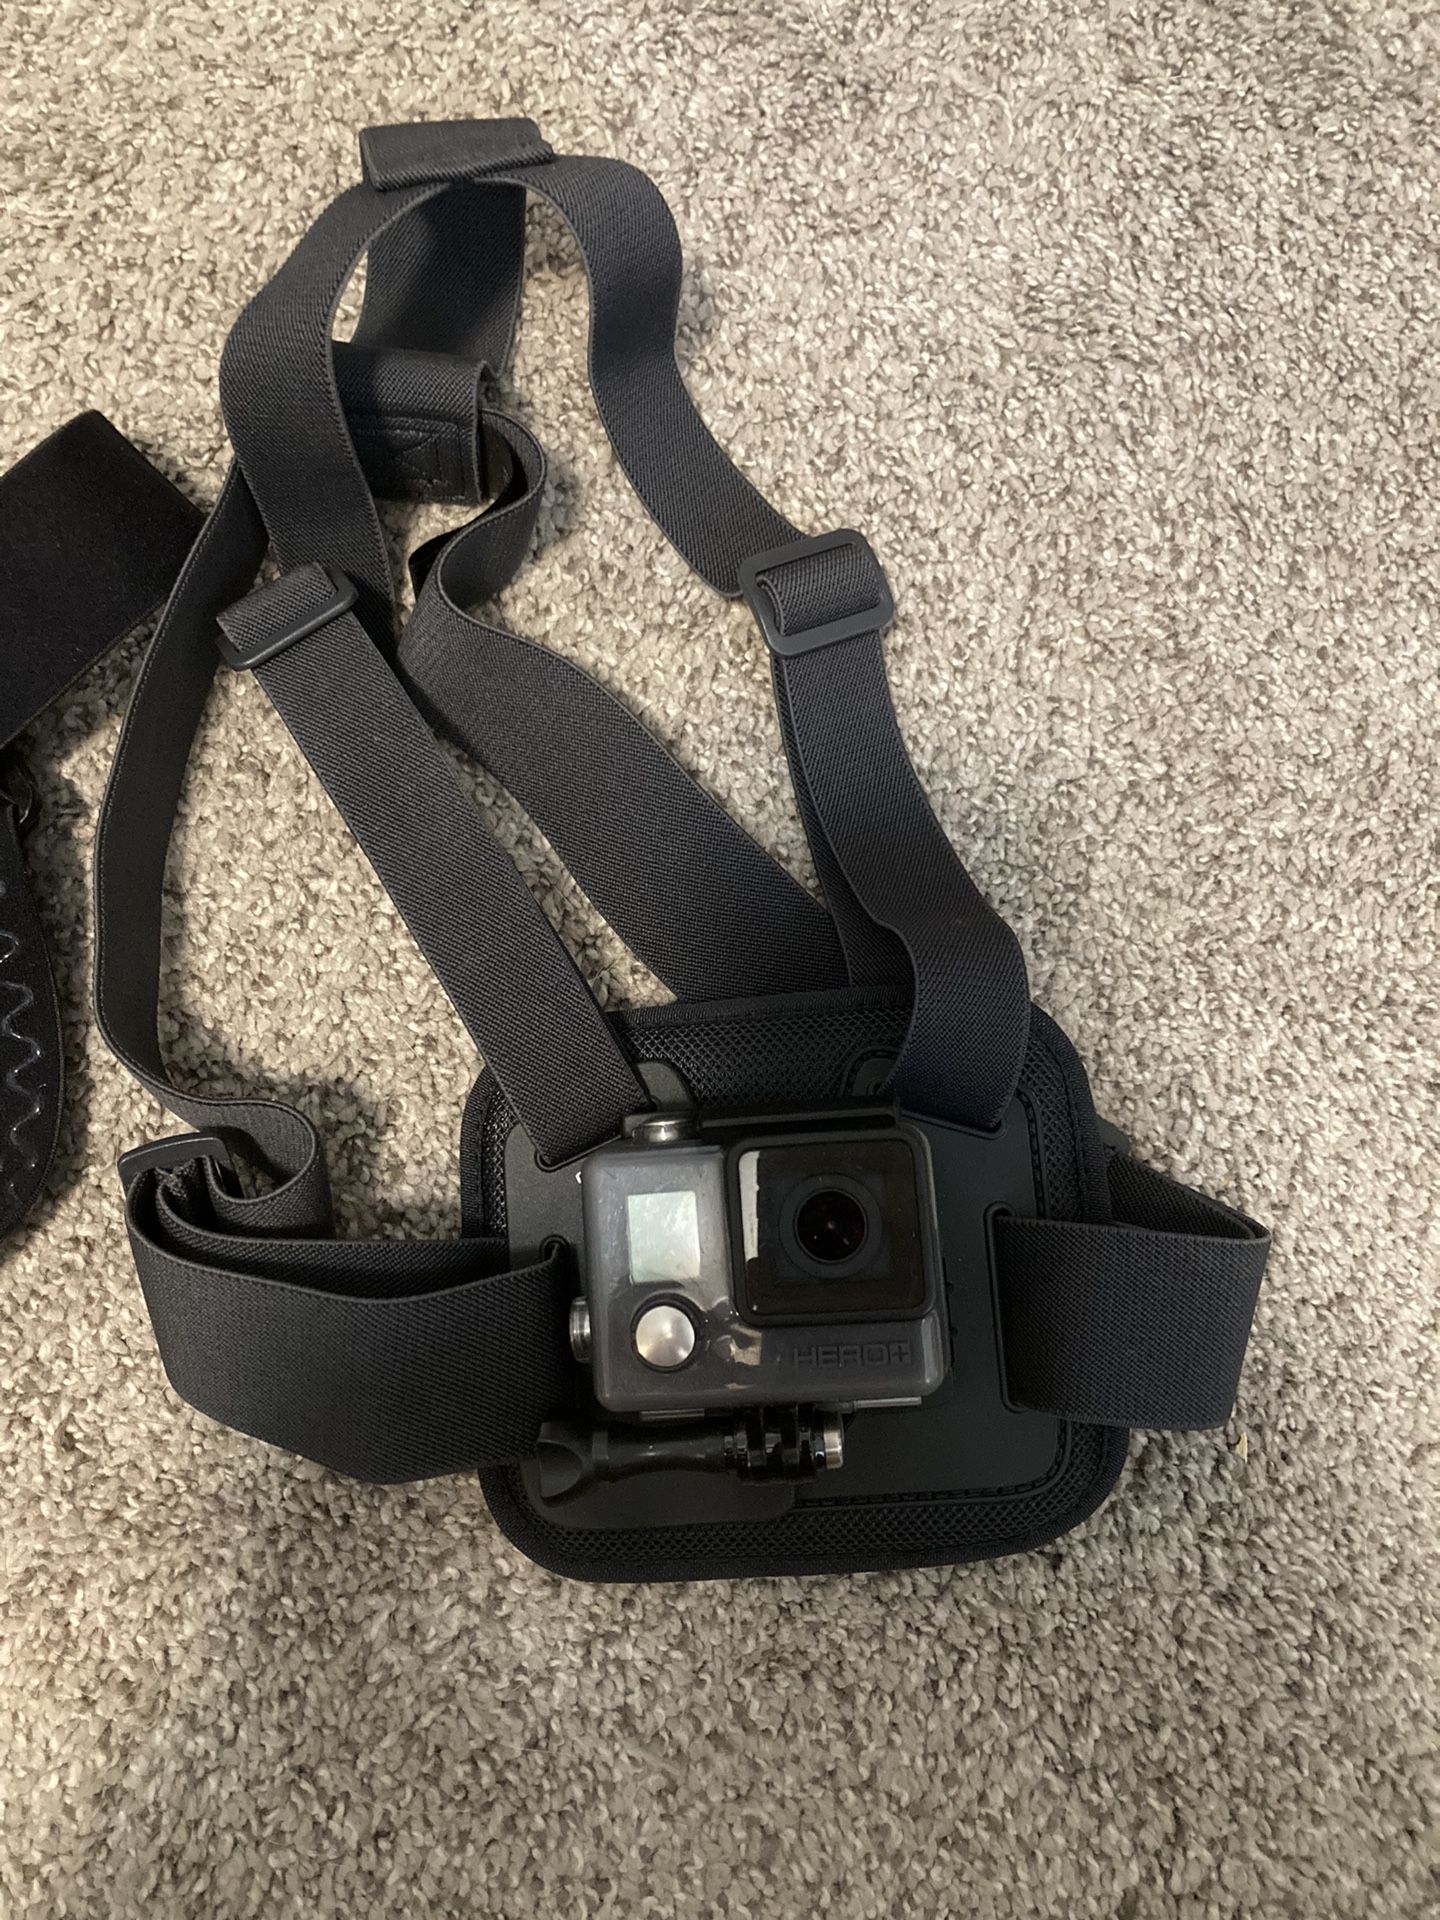 GoPro Hero+ And Accessories